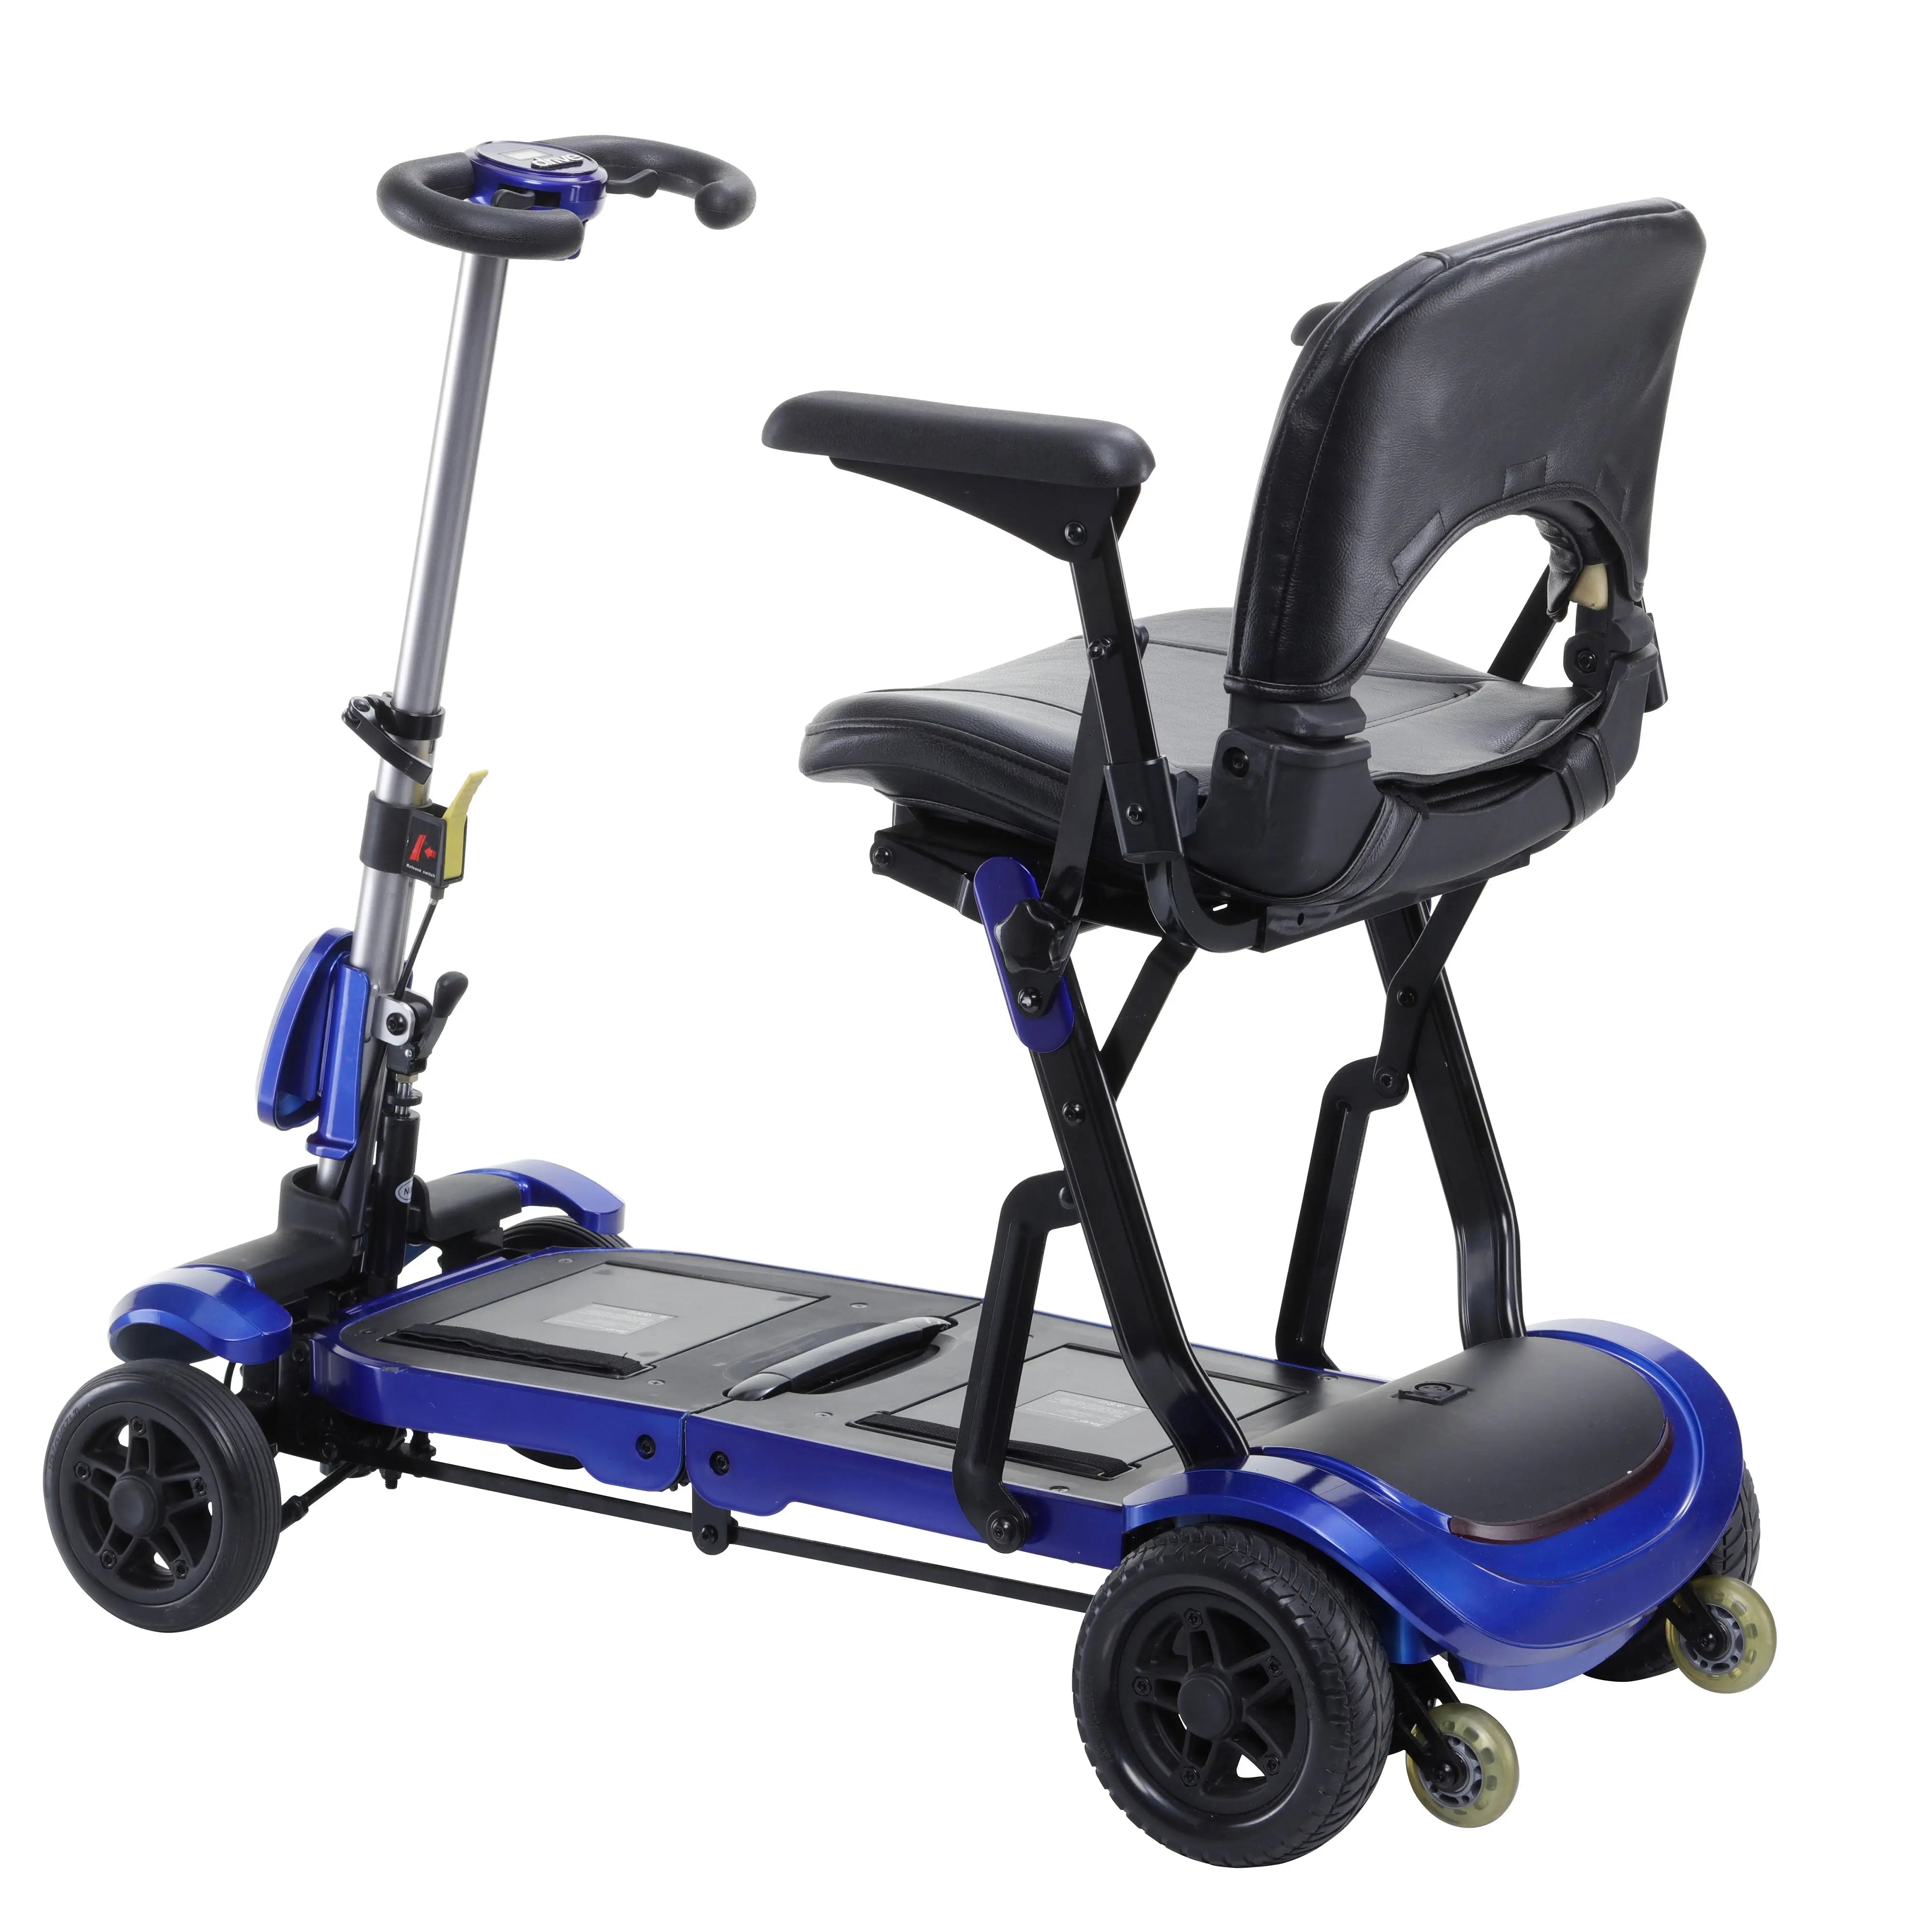 ZooMe Flex Ultra Compact Folding Travel 4 Wheel Scooter, Blue - Home Health Store Inc